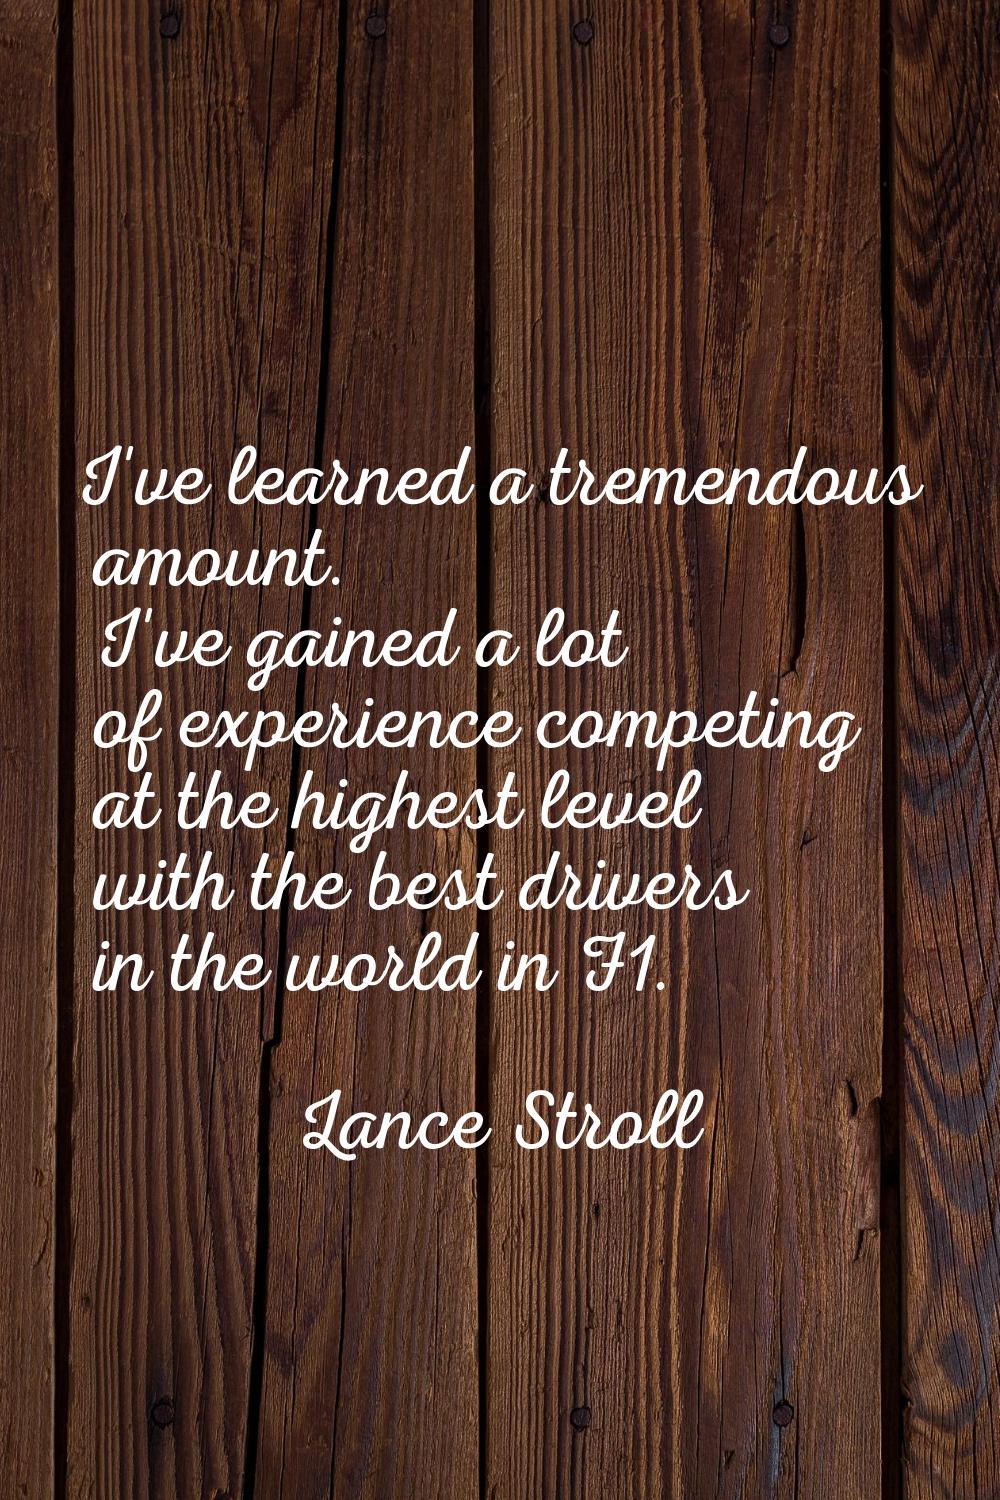 I've learned a tremendous amount. I've gained a lot of experience competing at the highest level wi